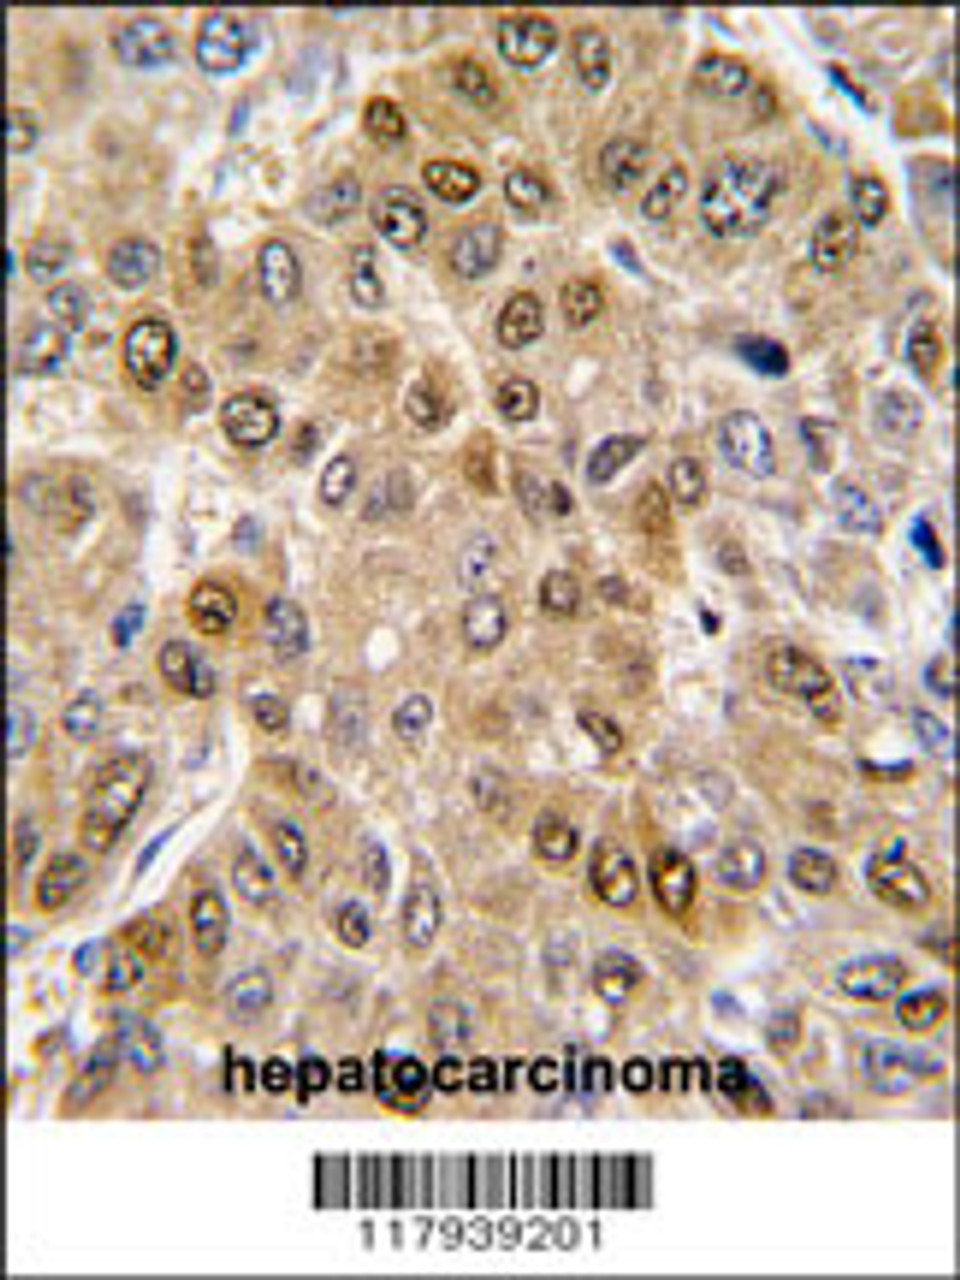 Formalin-fixed and paraffin-embedded human hepatocarcinoma tissue reacted with DDX5 antibody, which was peroxidase-conjugated to the secondary antibody, followed by DAB staining.